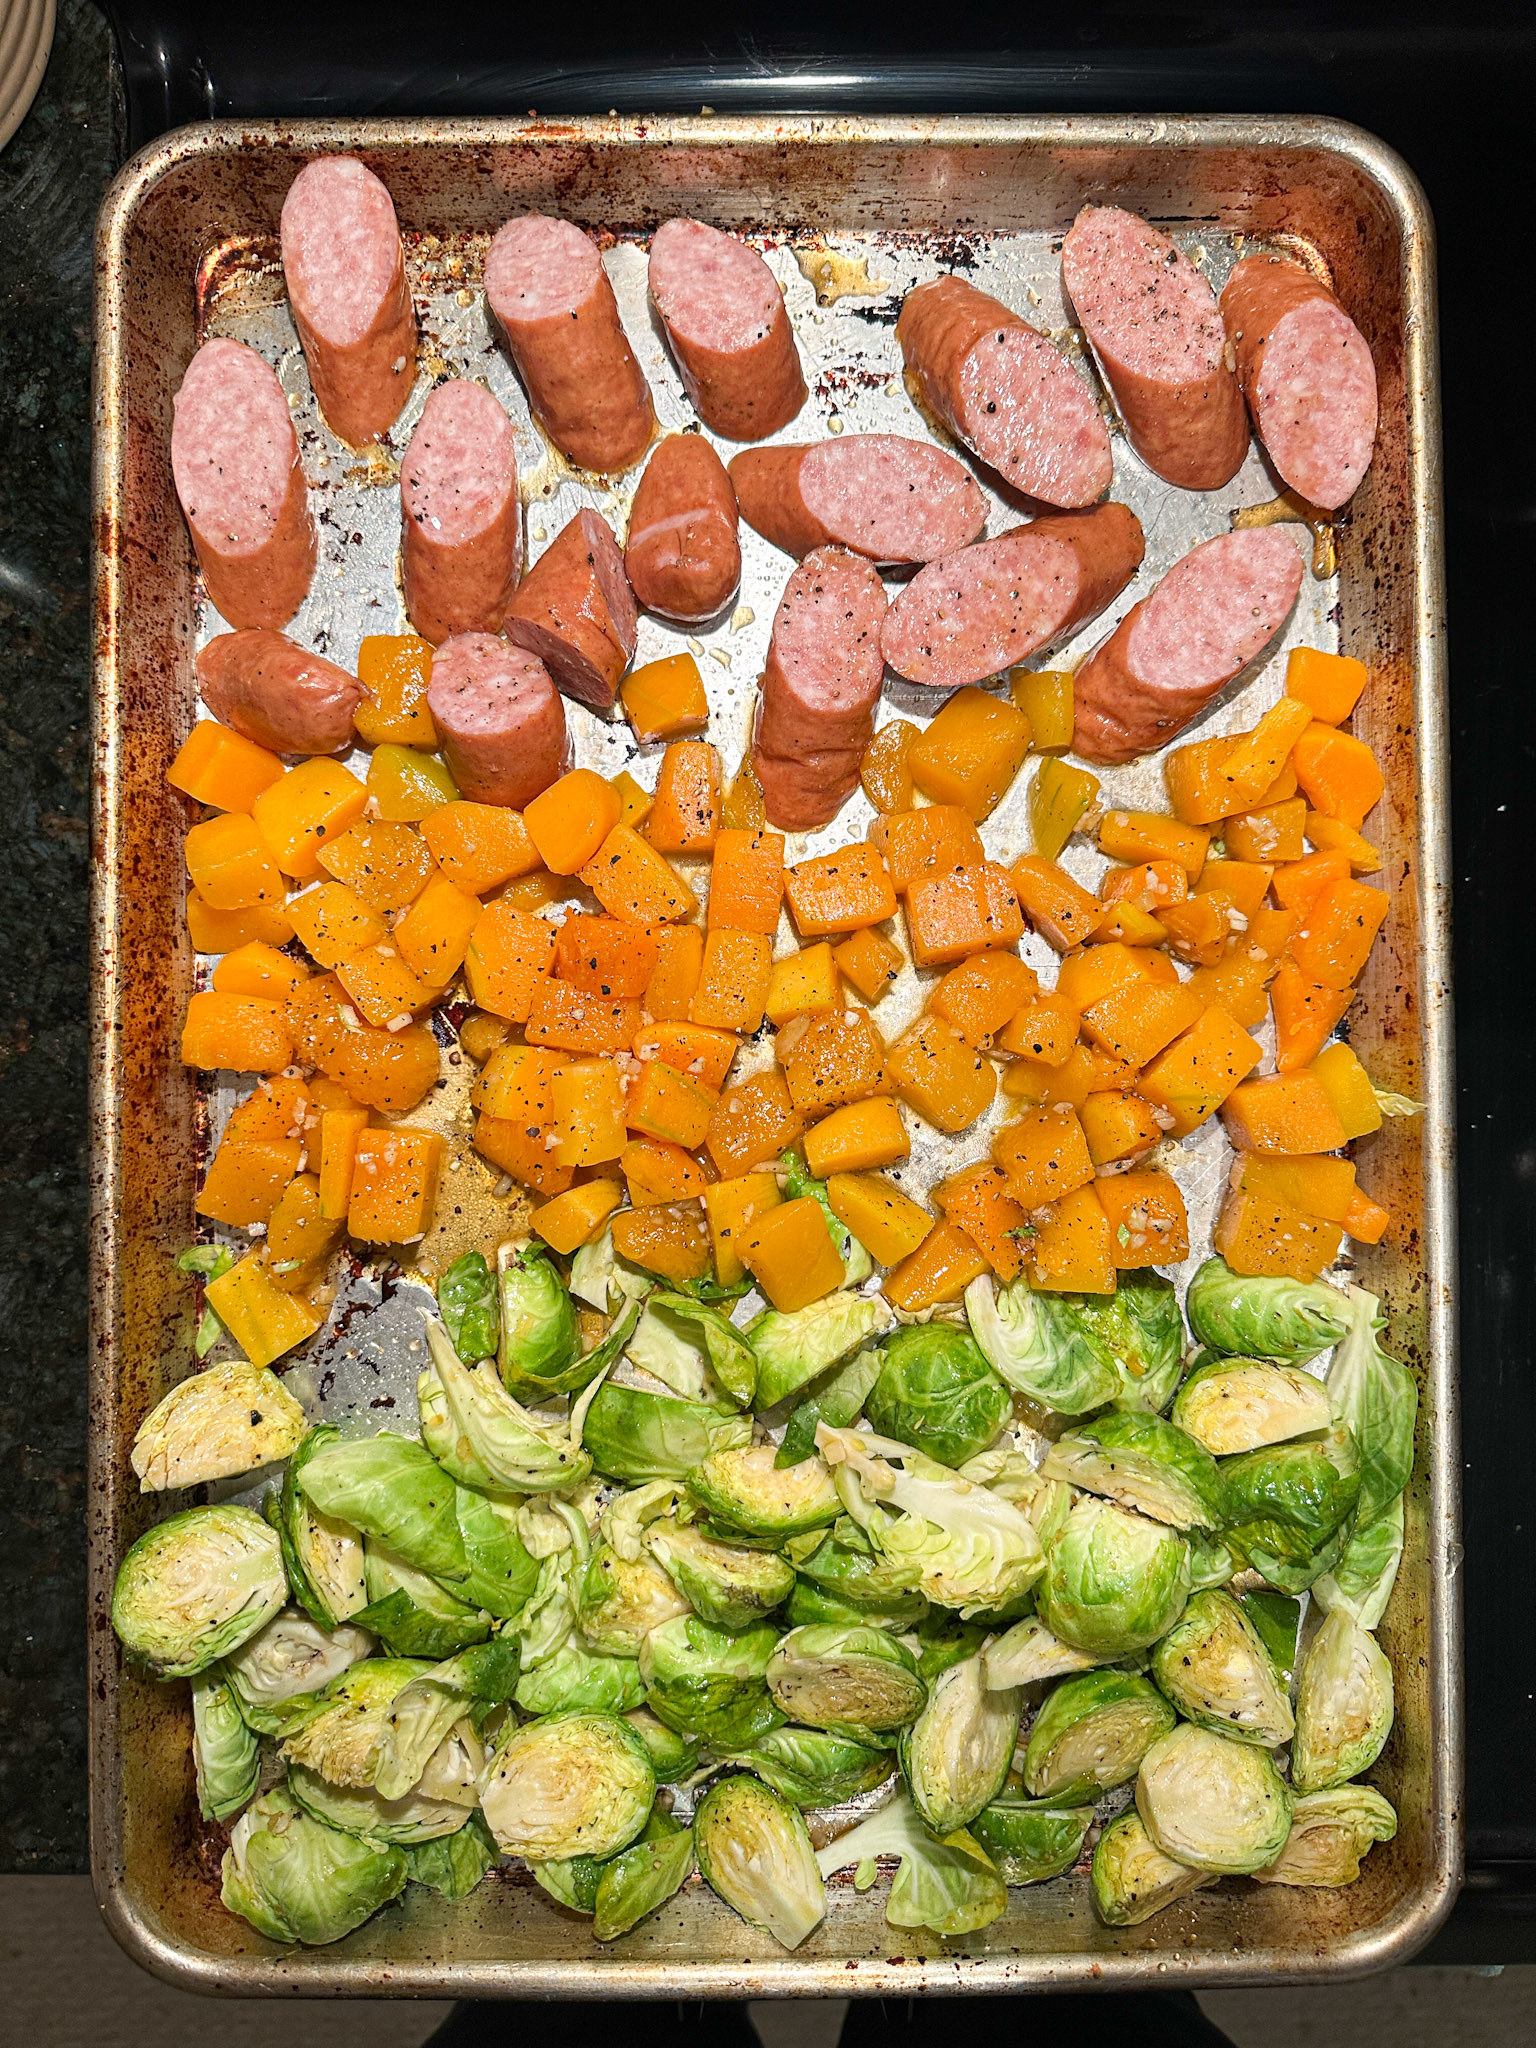 sausage, squash, and brussels sprouts all lined up and seasoned on a sheet pan